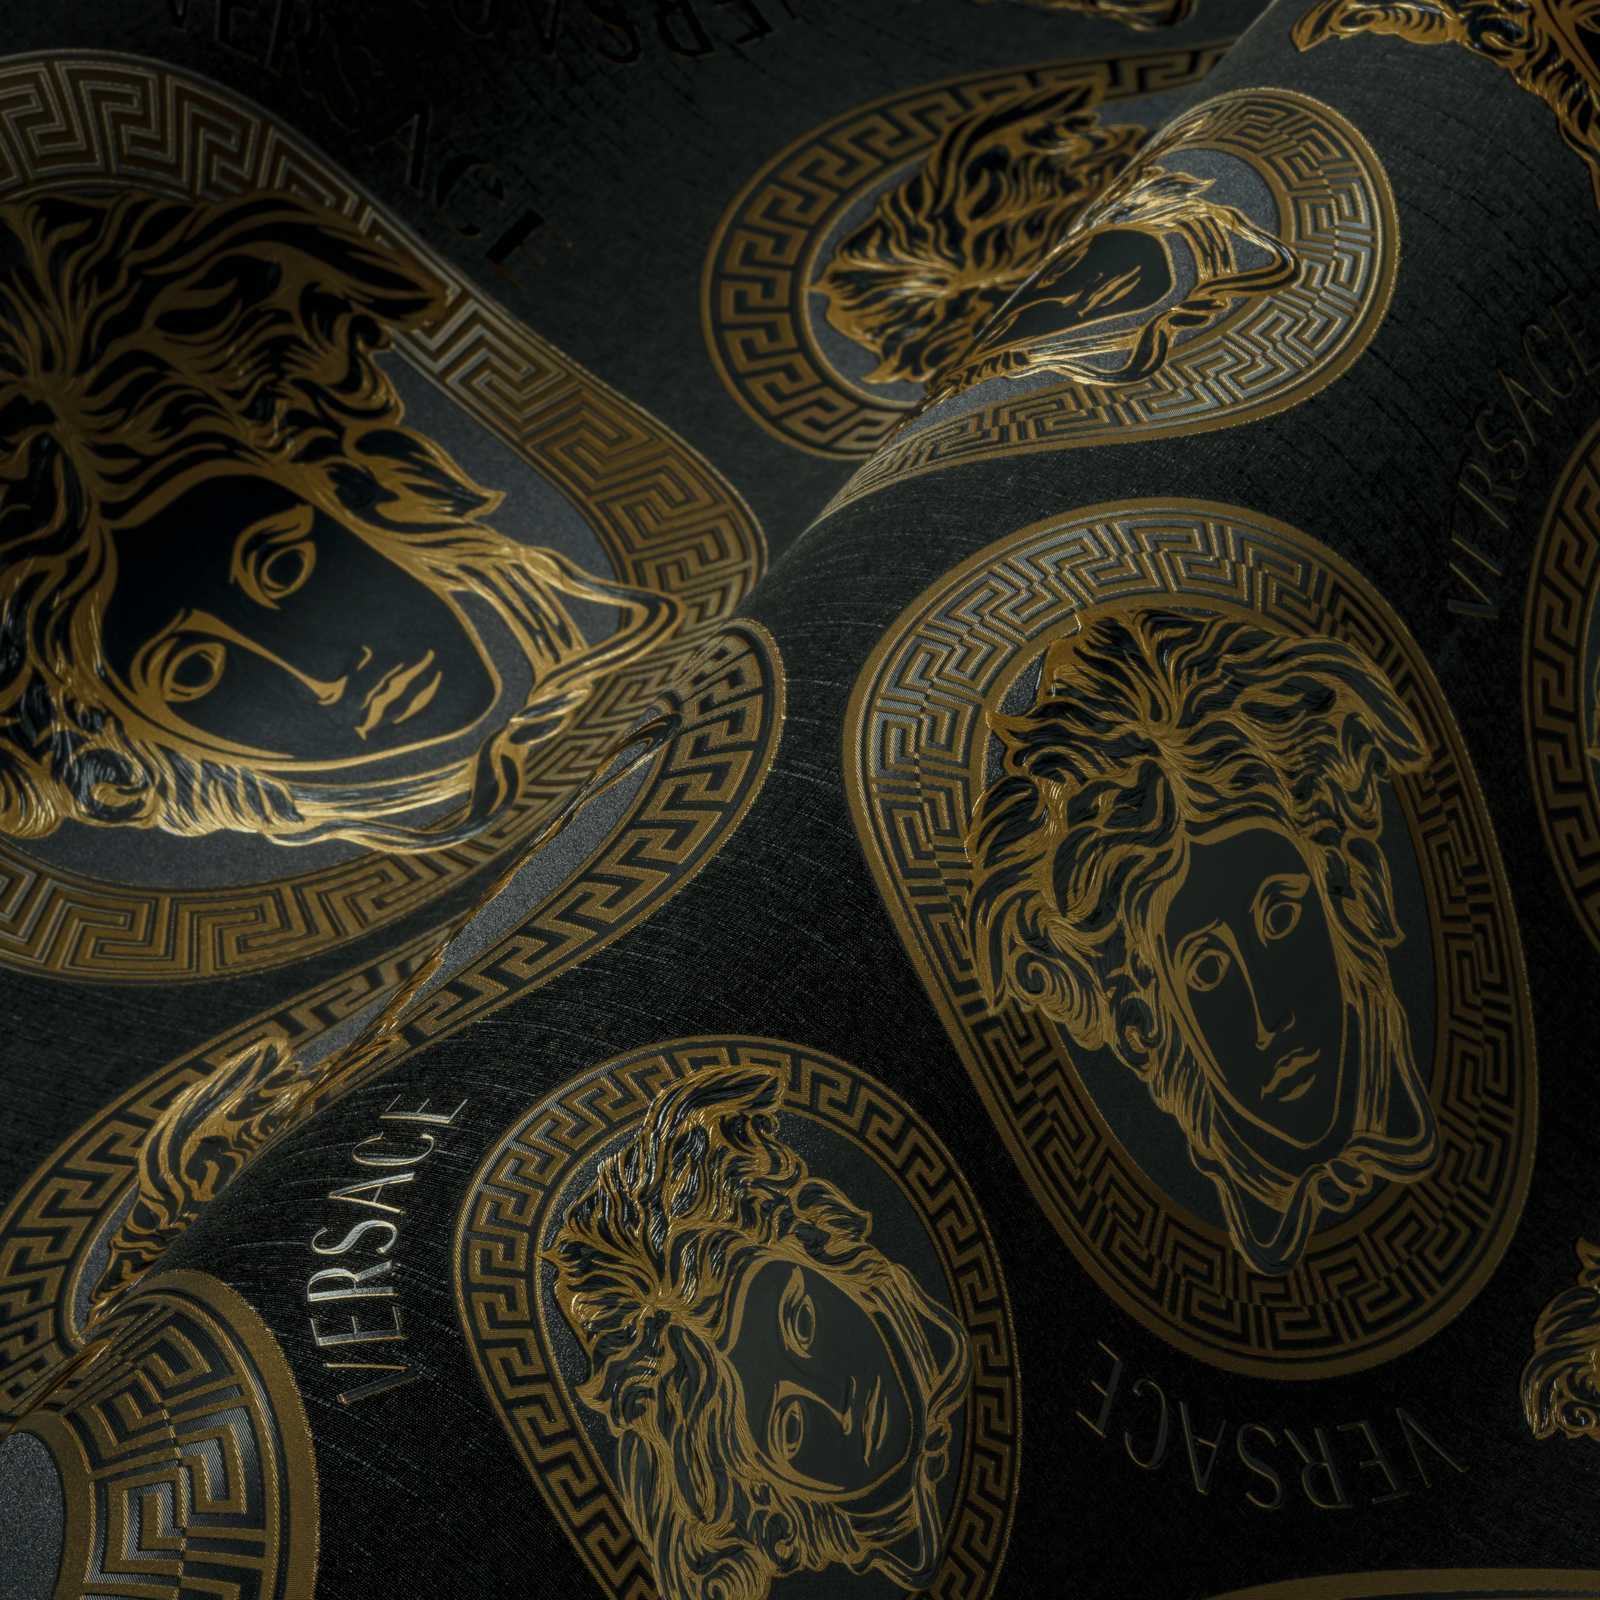             VERSACE wallpaper black and gold with Medusa motif
        